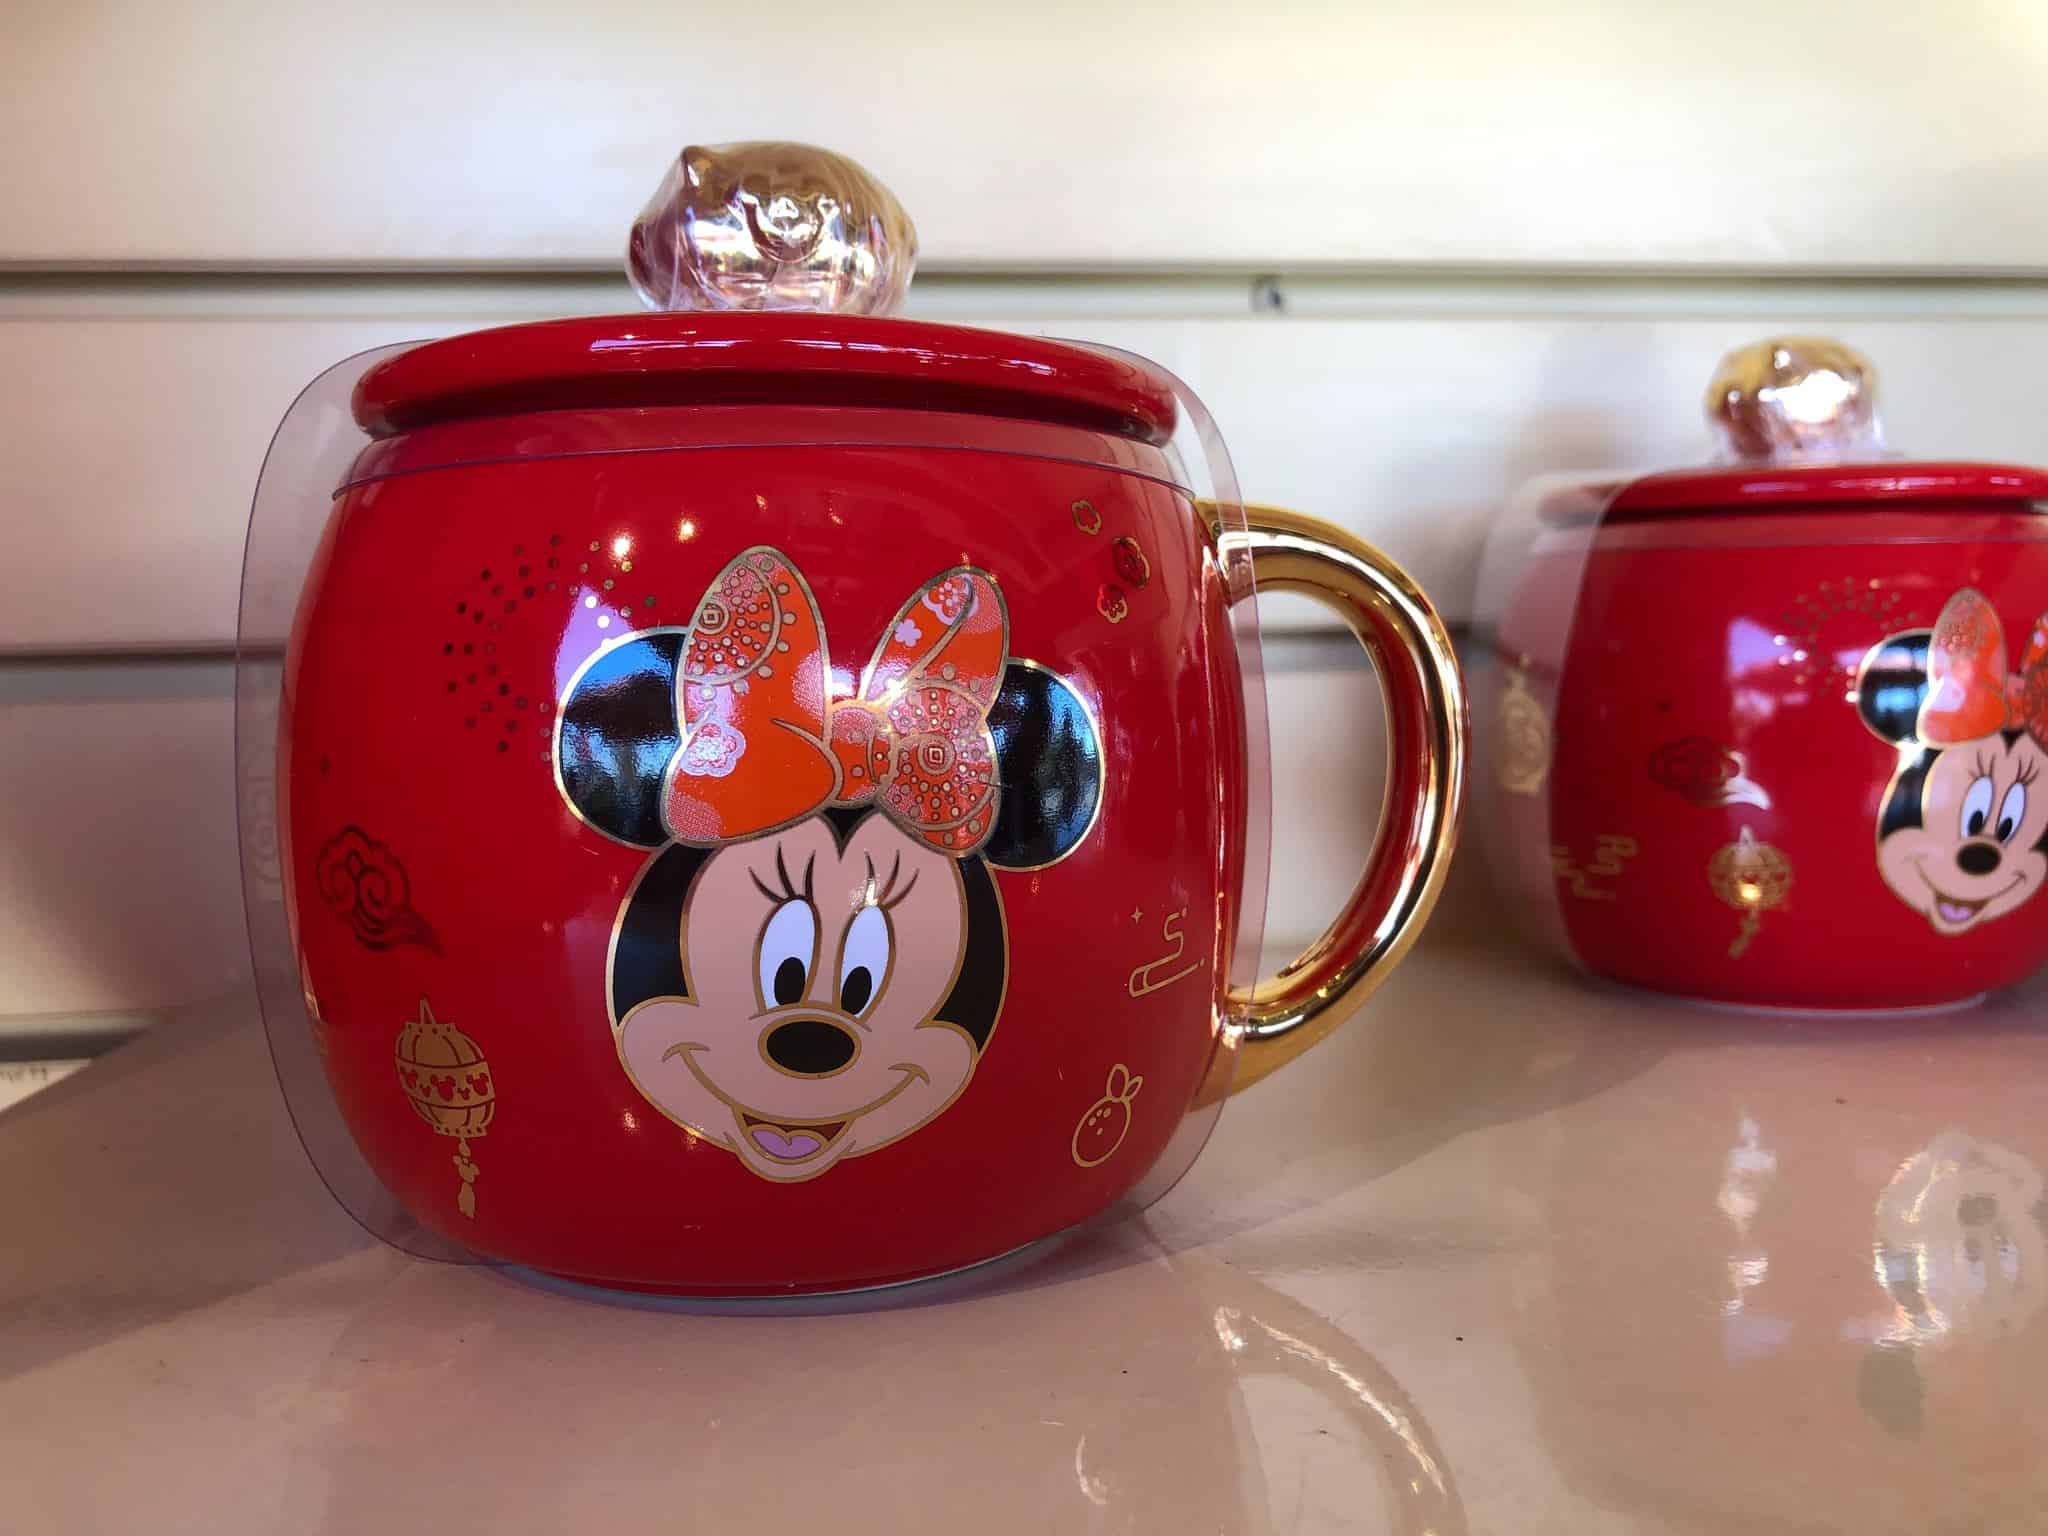 2021 Disney Parks Chinese Lunar New Year Red Mickey Mouse Coffee Mug w/ Lid